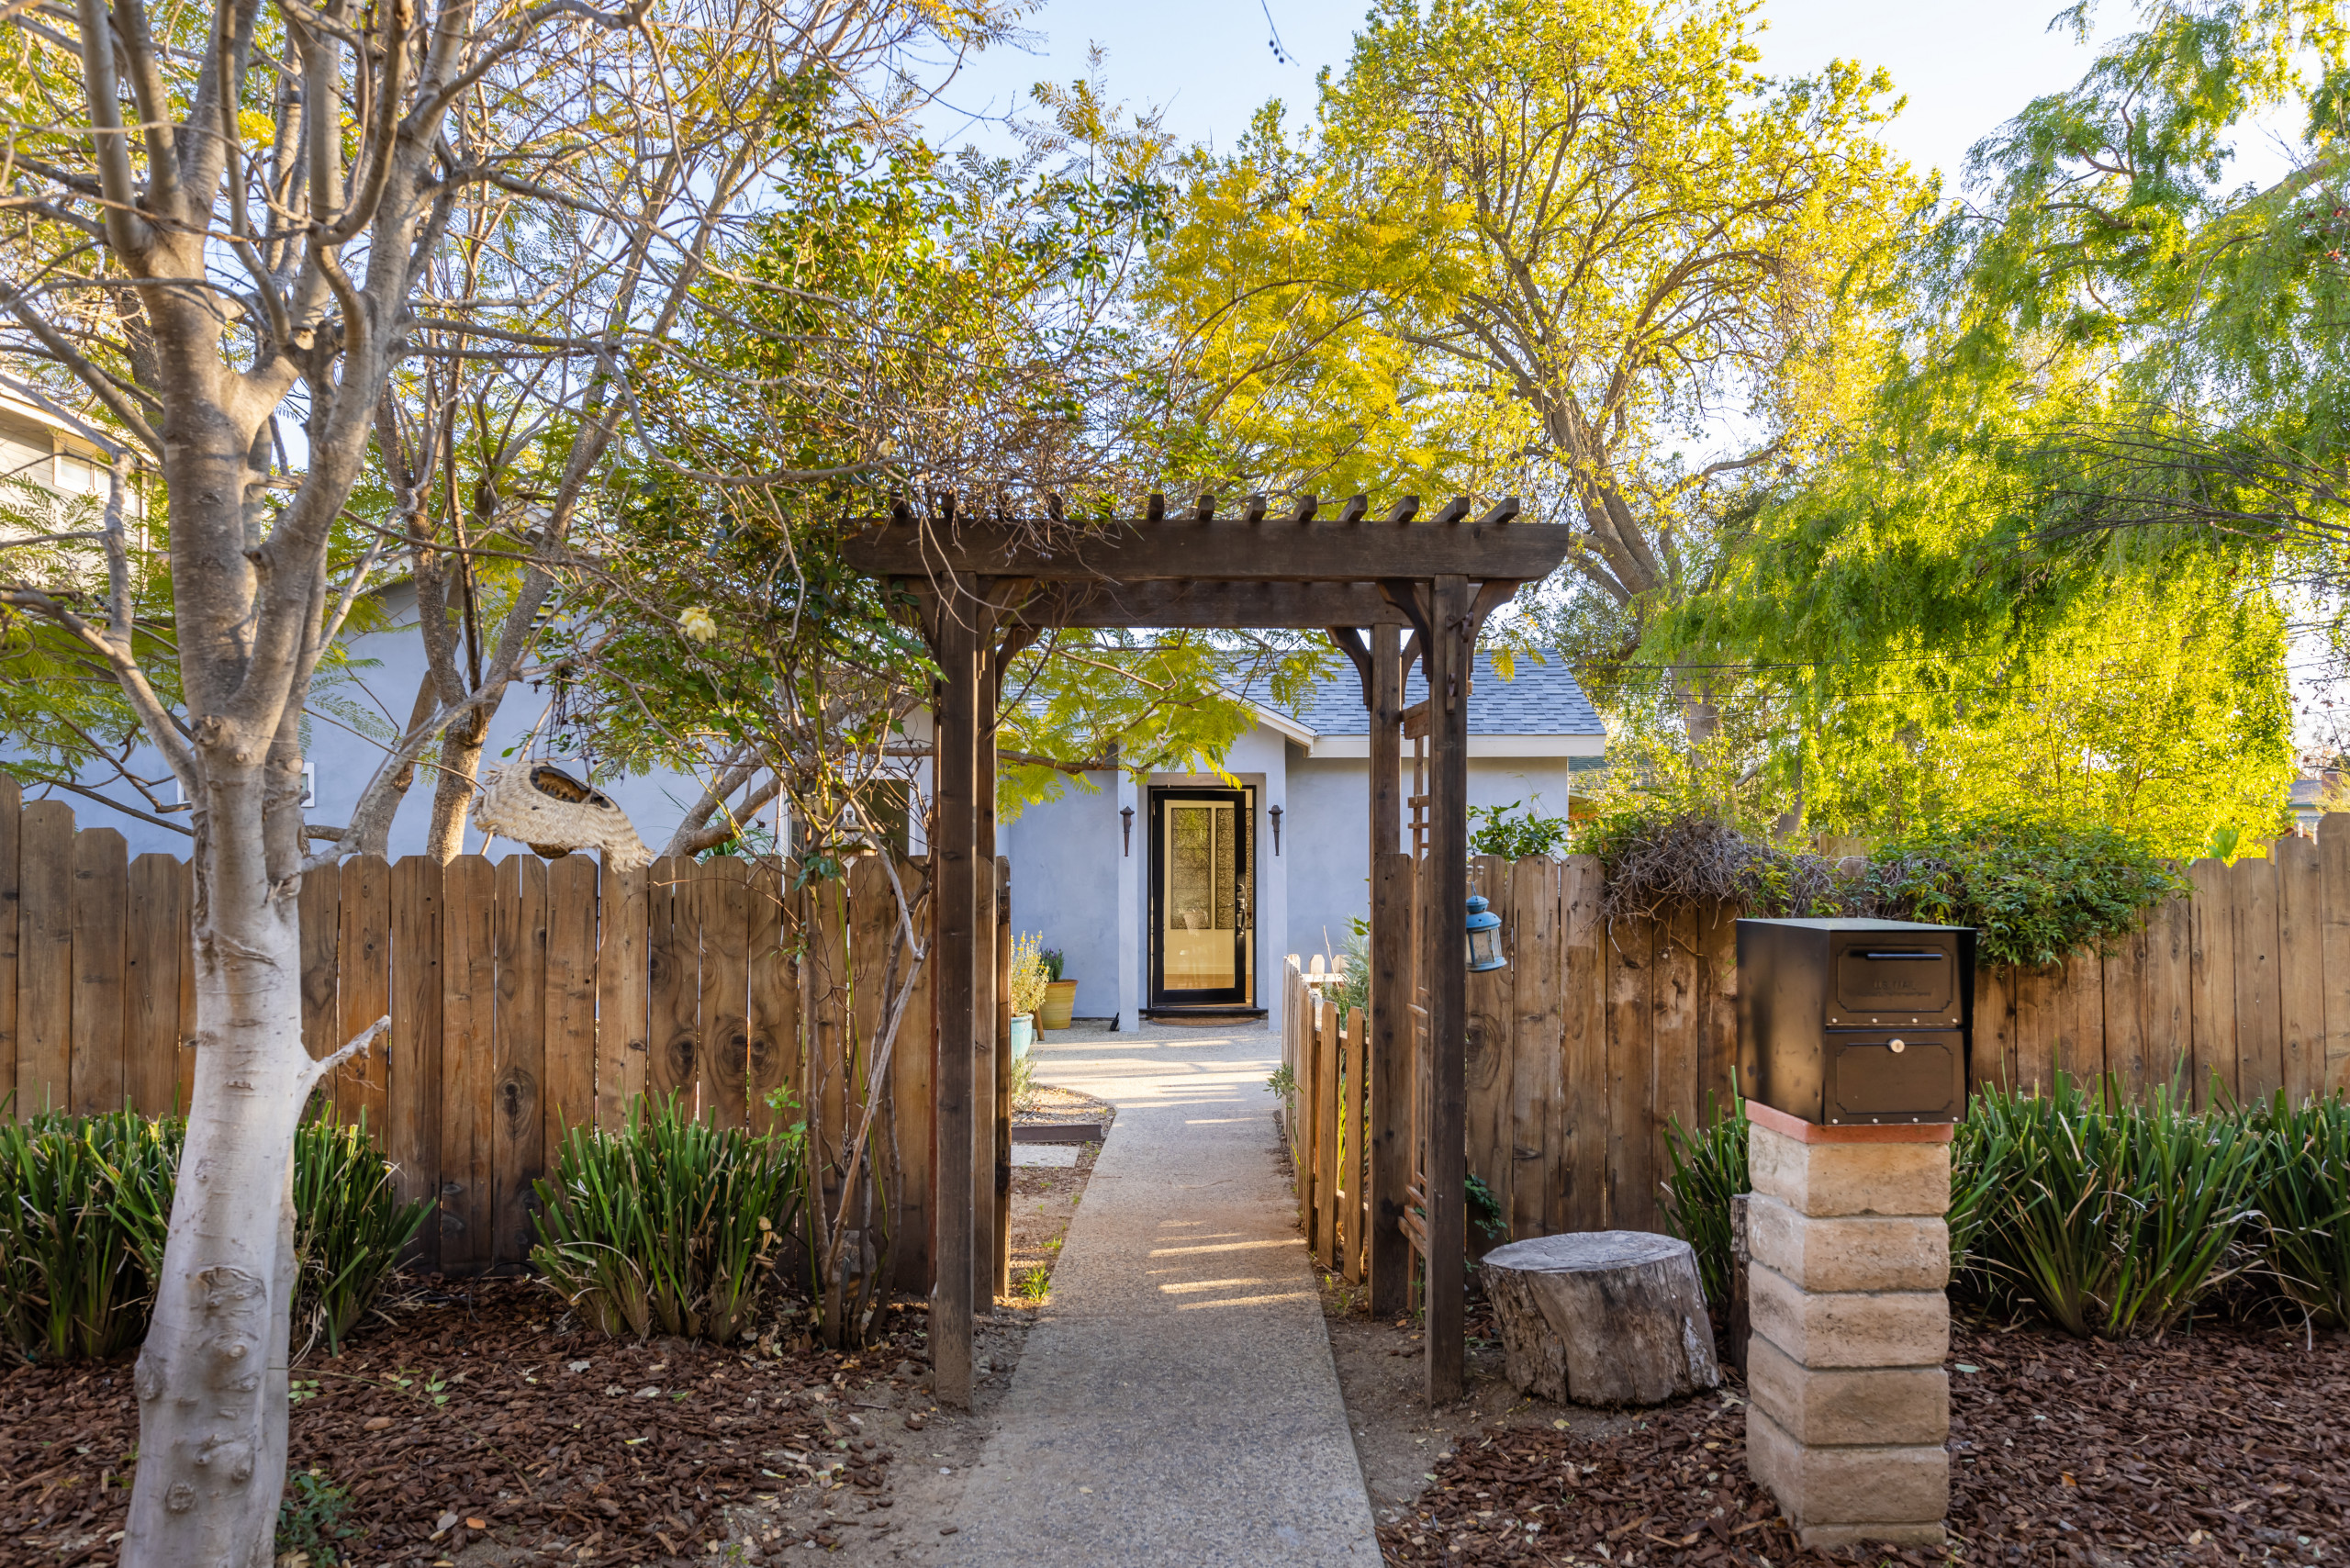 Ojai, CA - Complete Home Remodel / Property Entrance